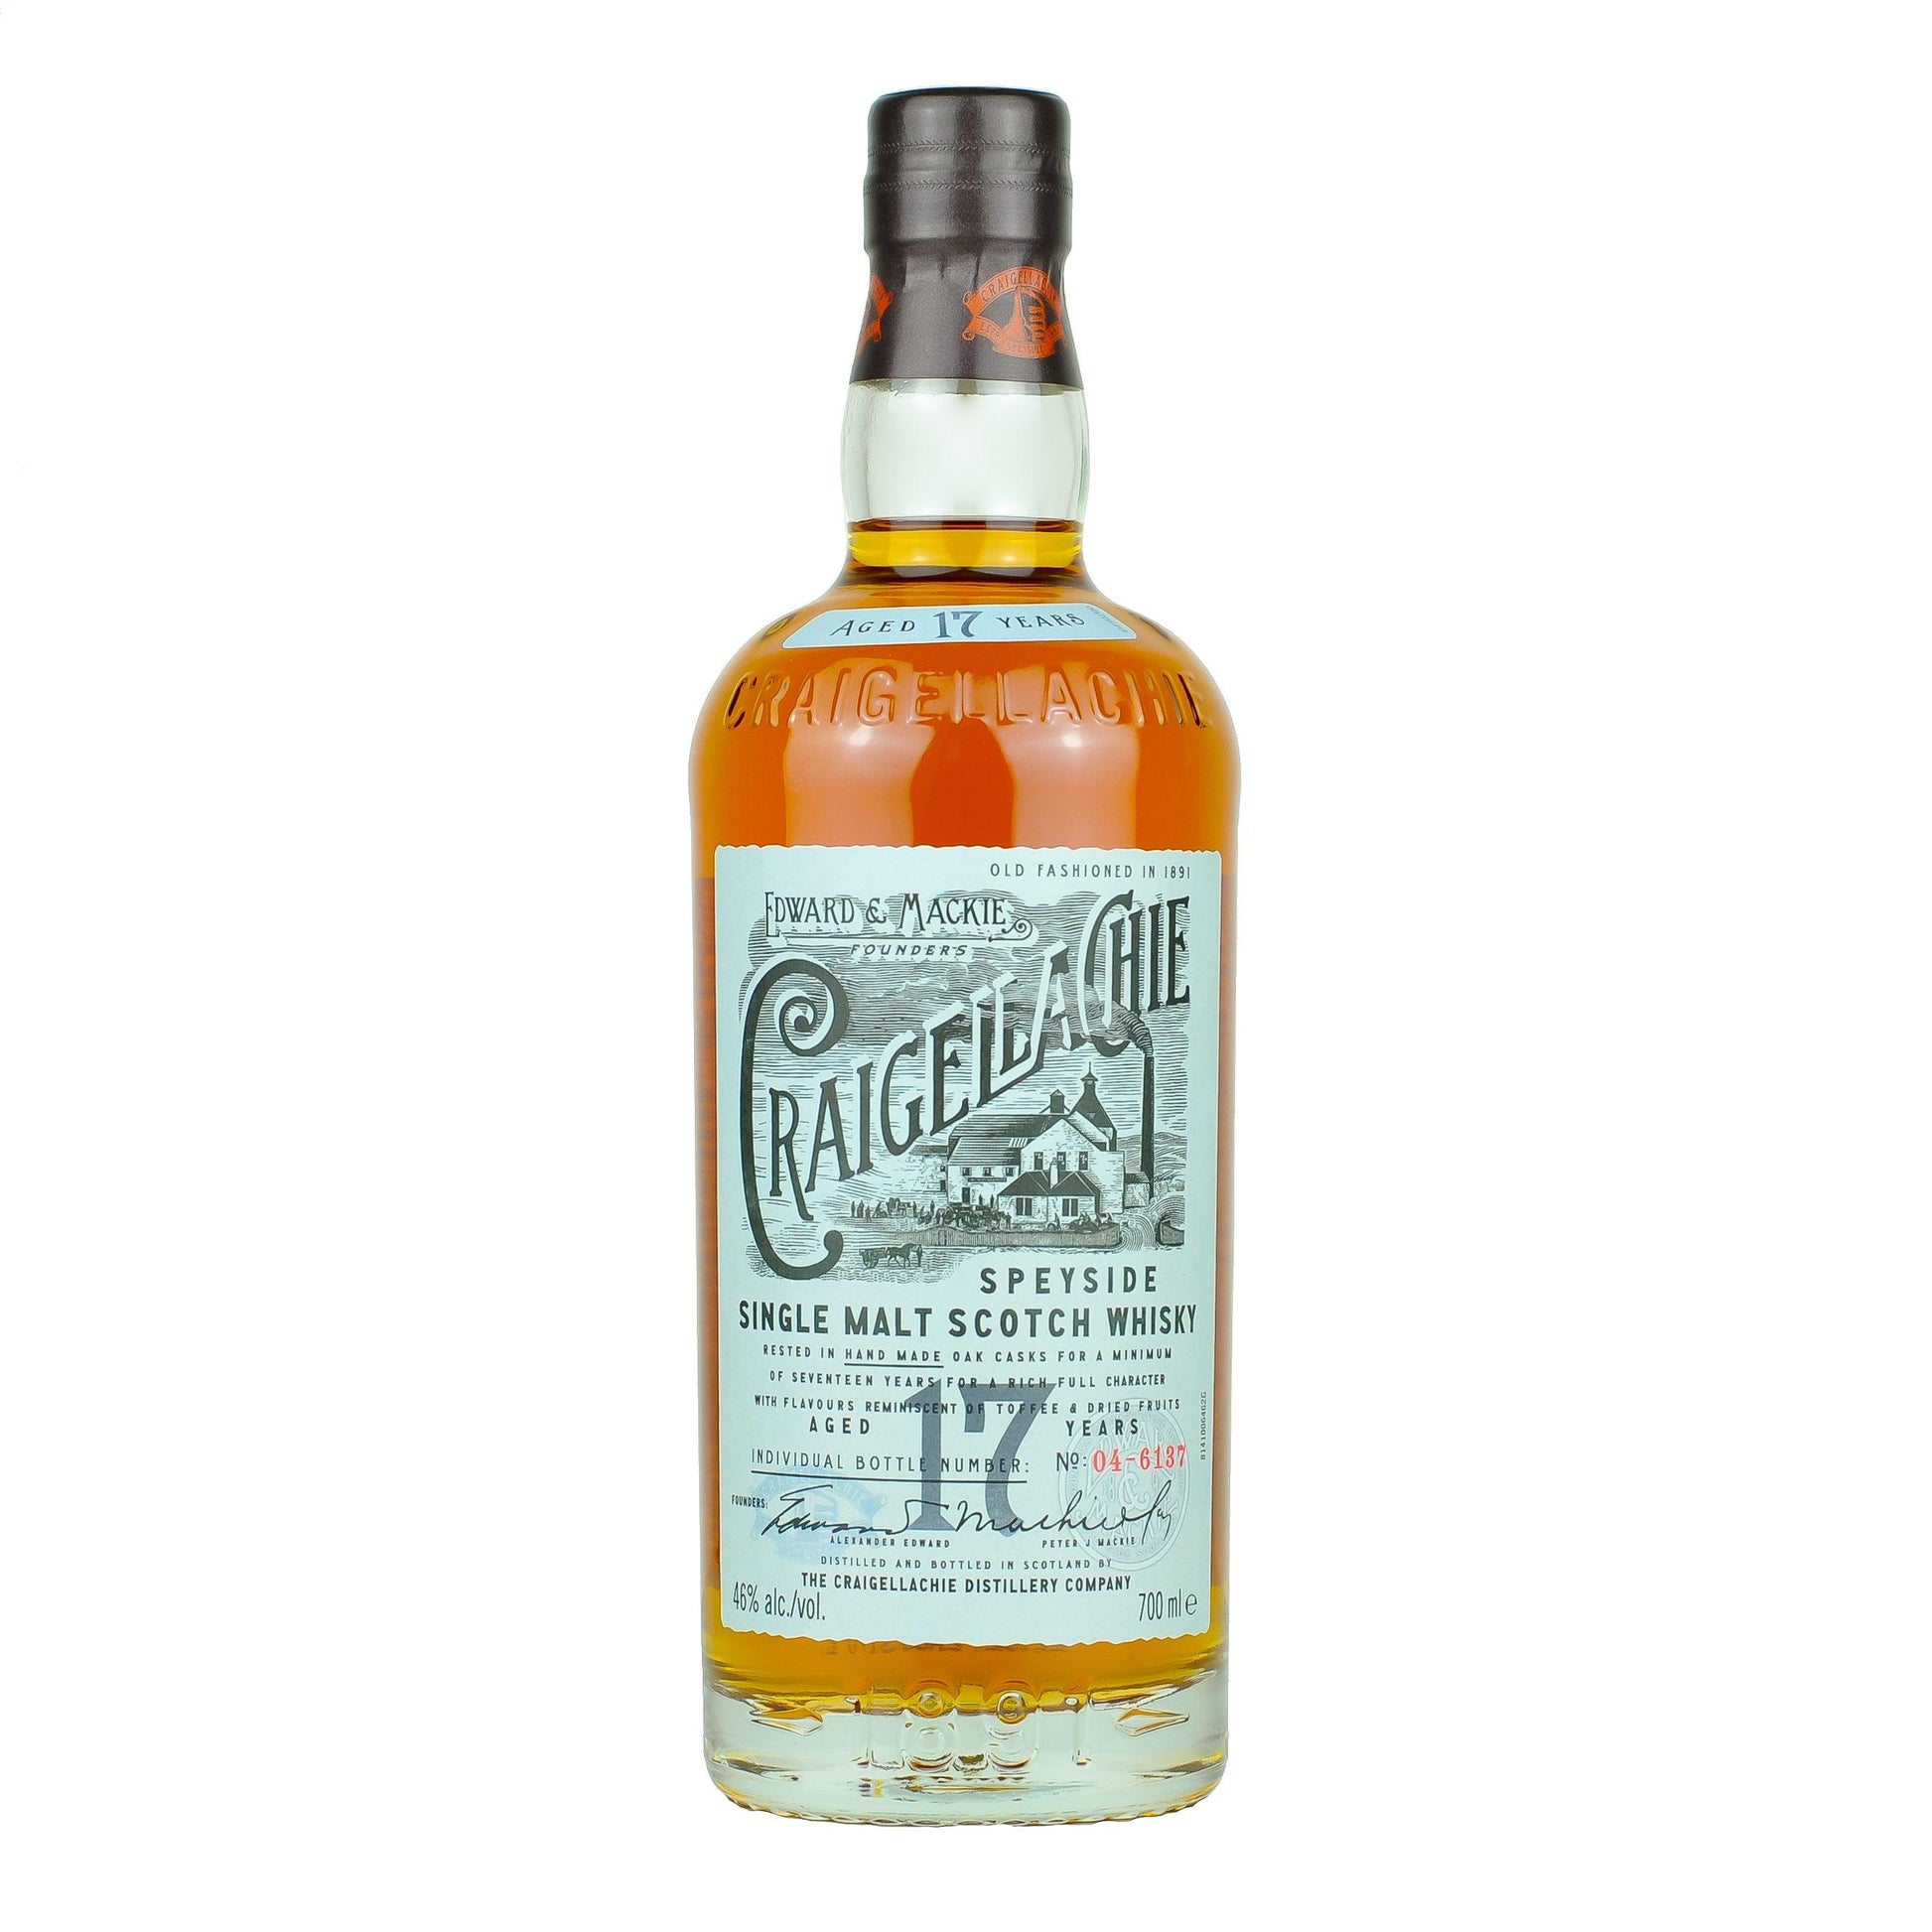 Craigellachie 17 Years Old - Whisky Grail